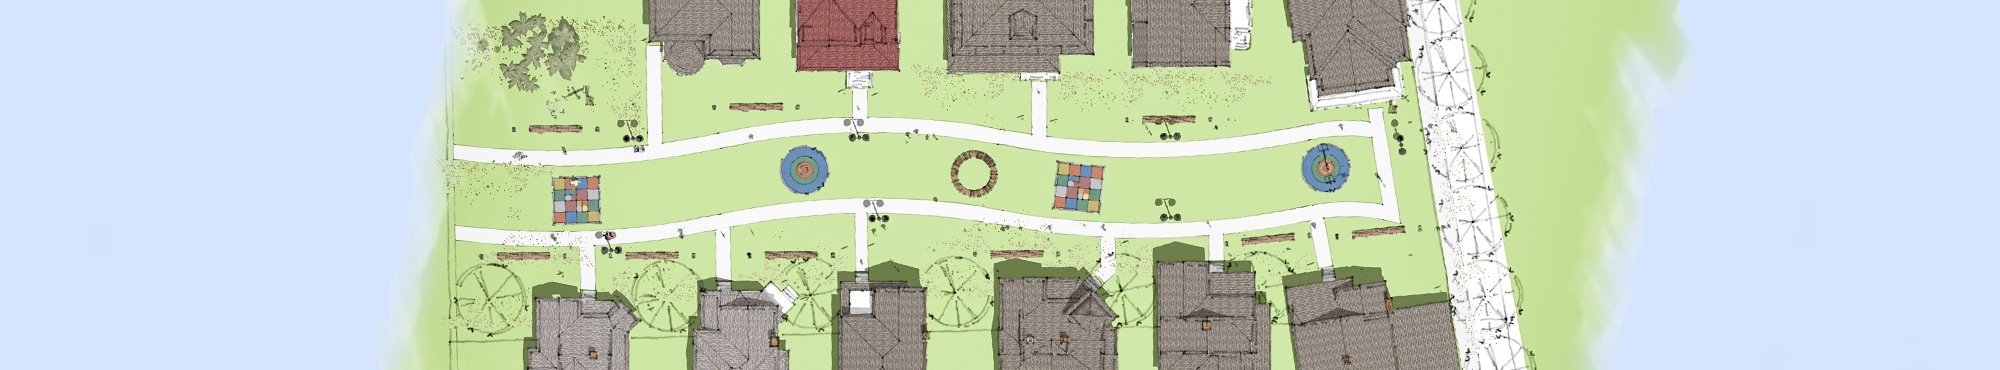 Example park aerial drawing with park amenities bewteen the historic homes including benches, art, and games.